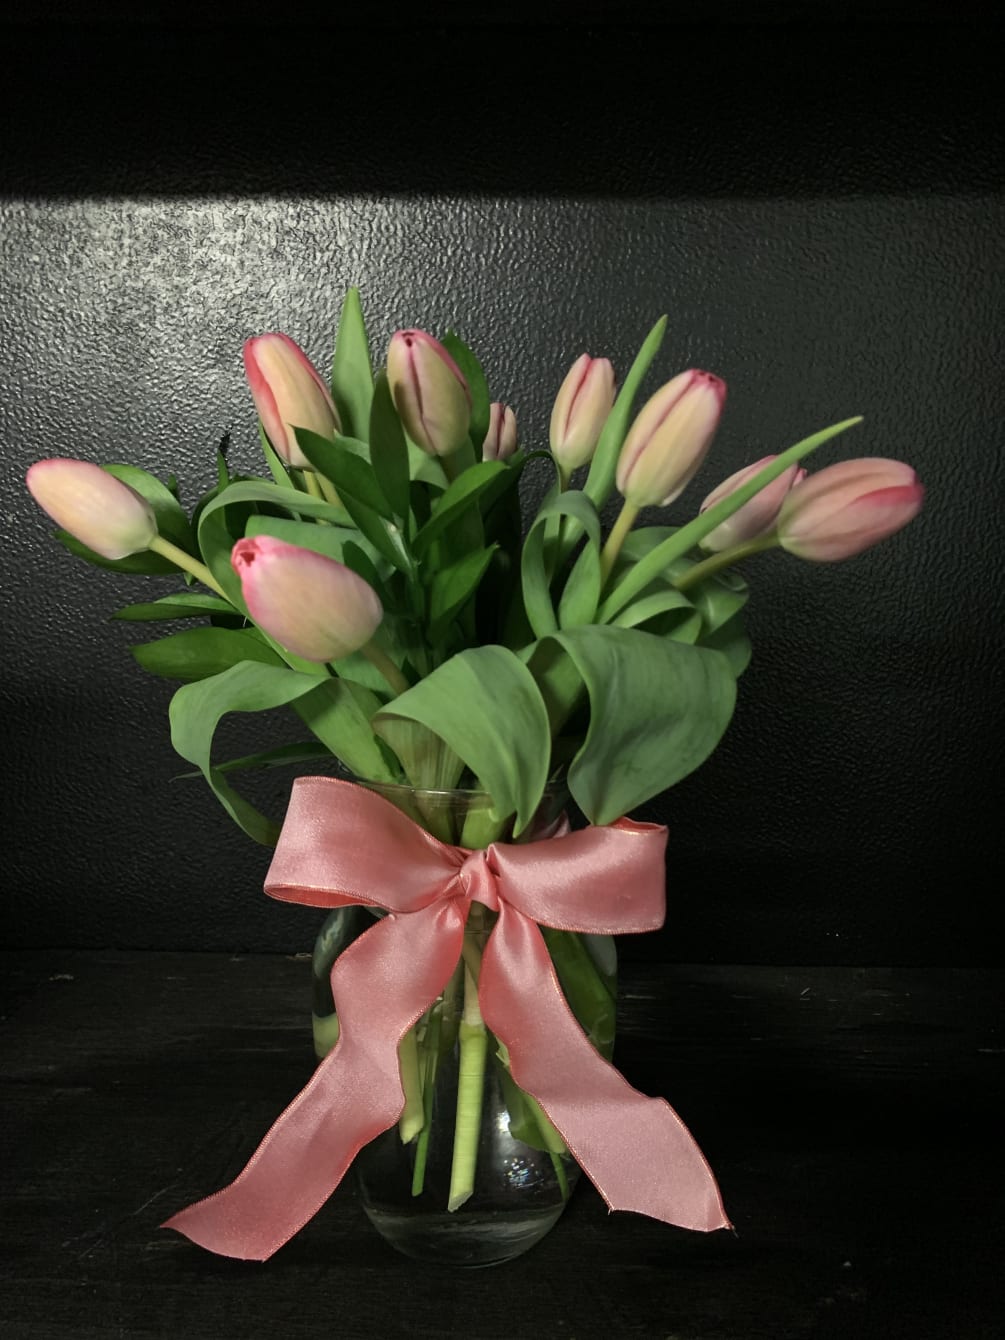 Send your loved one an arrangement of 10 beautiful tulips. An elegant